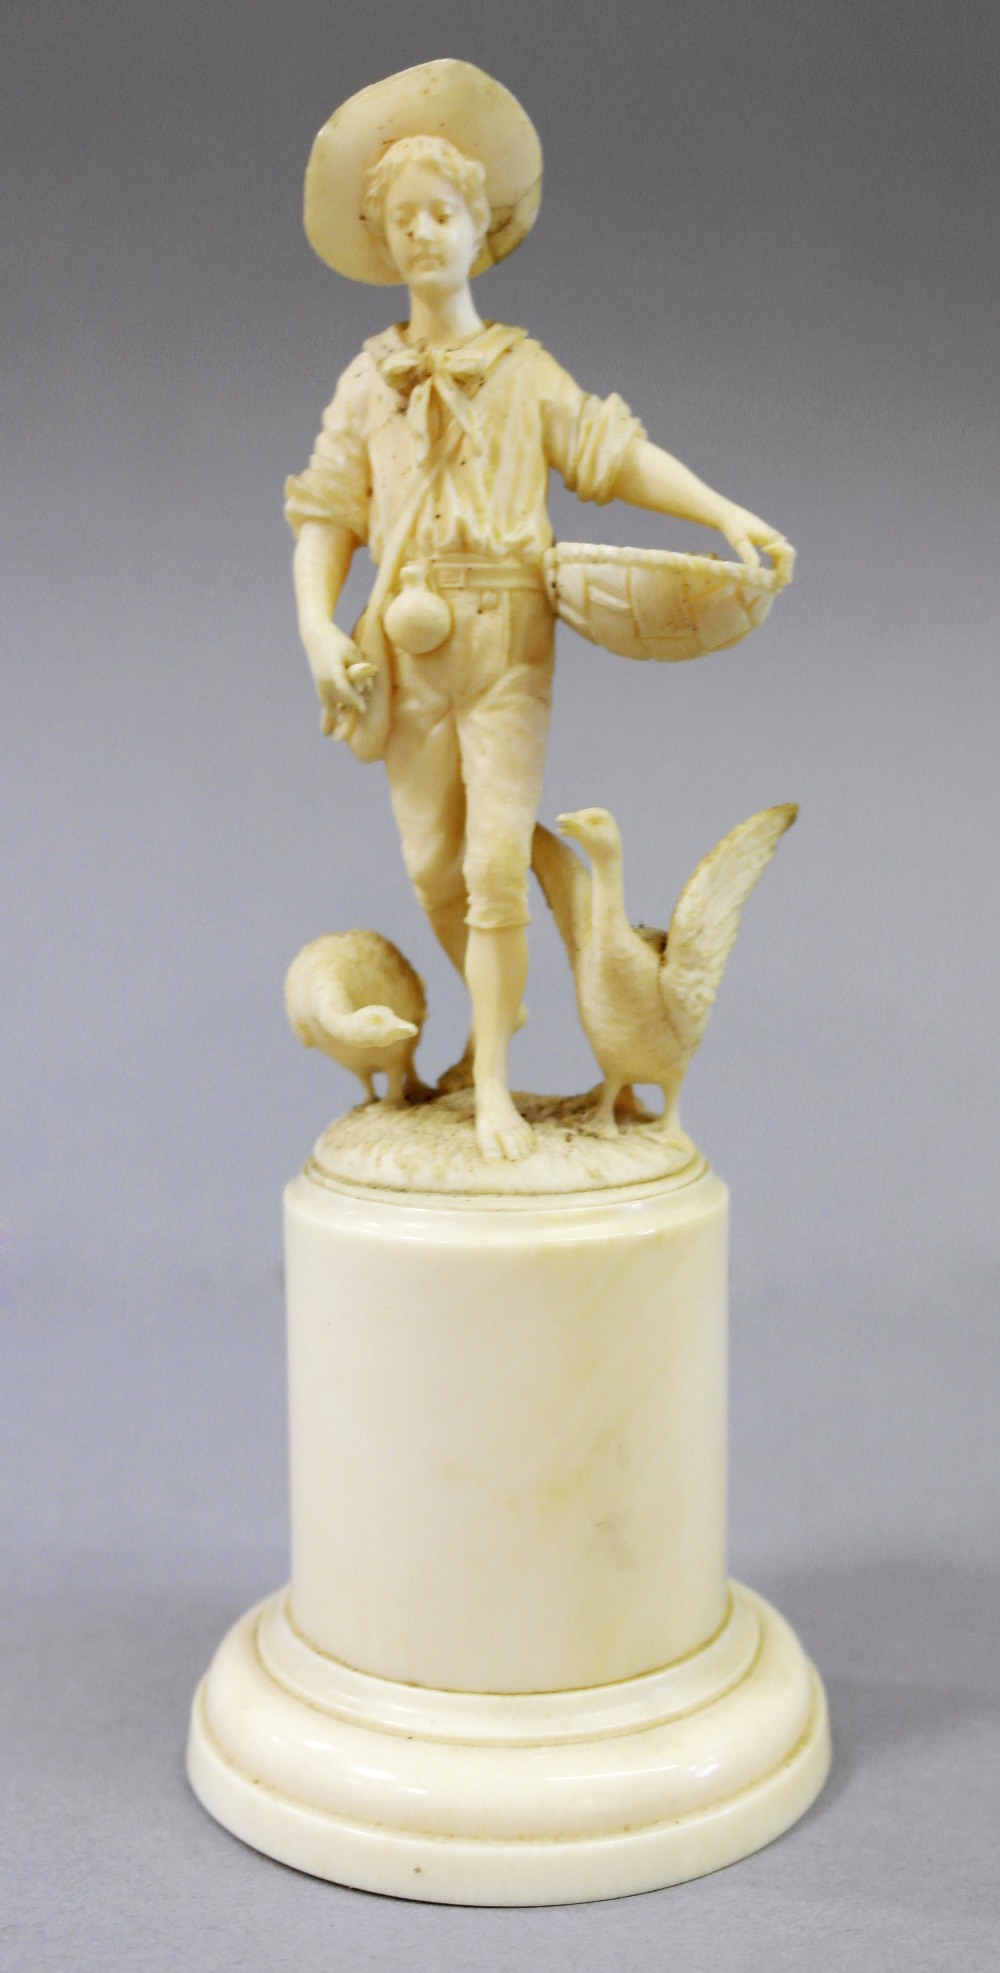 A European ivory carving
19th century
Representing a boy carrying a wicker basket under his left arm